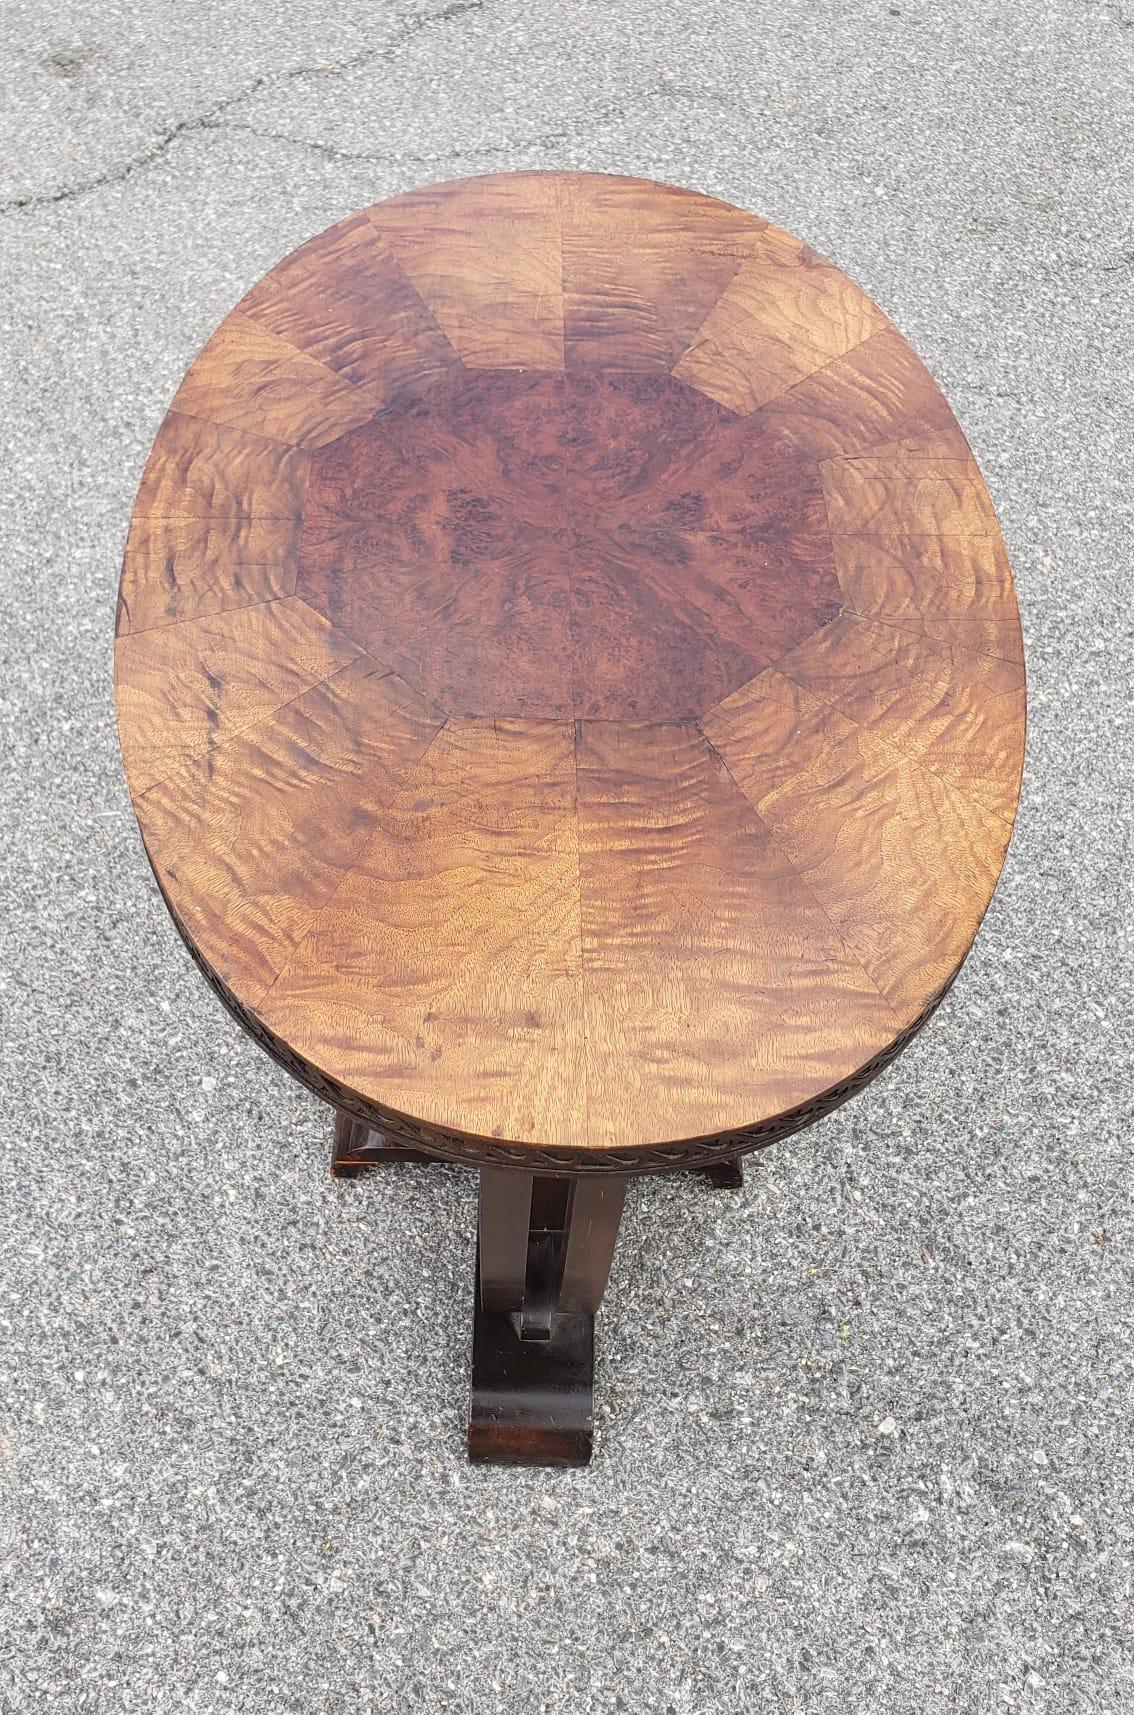 American Early 20th Century Burl Walnut Oval Center Table or Side Table For Sale